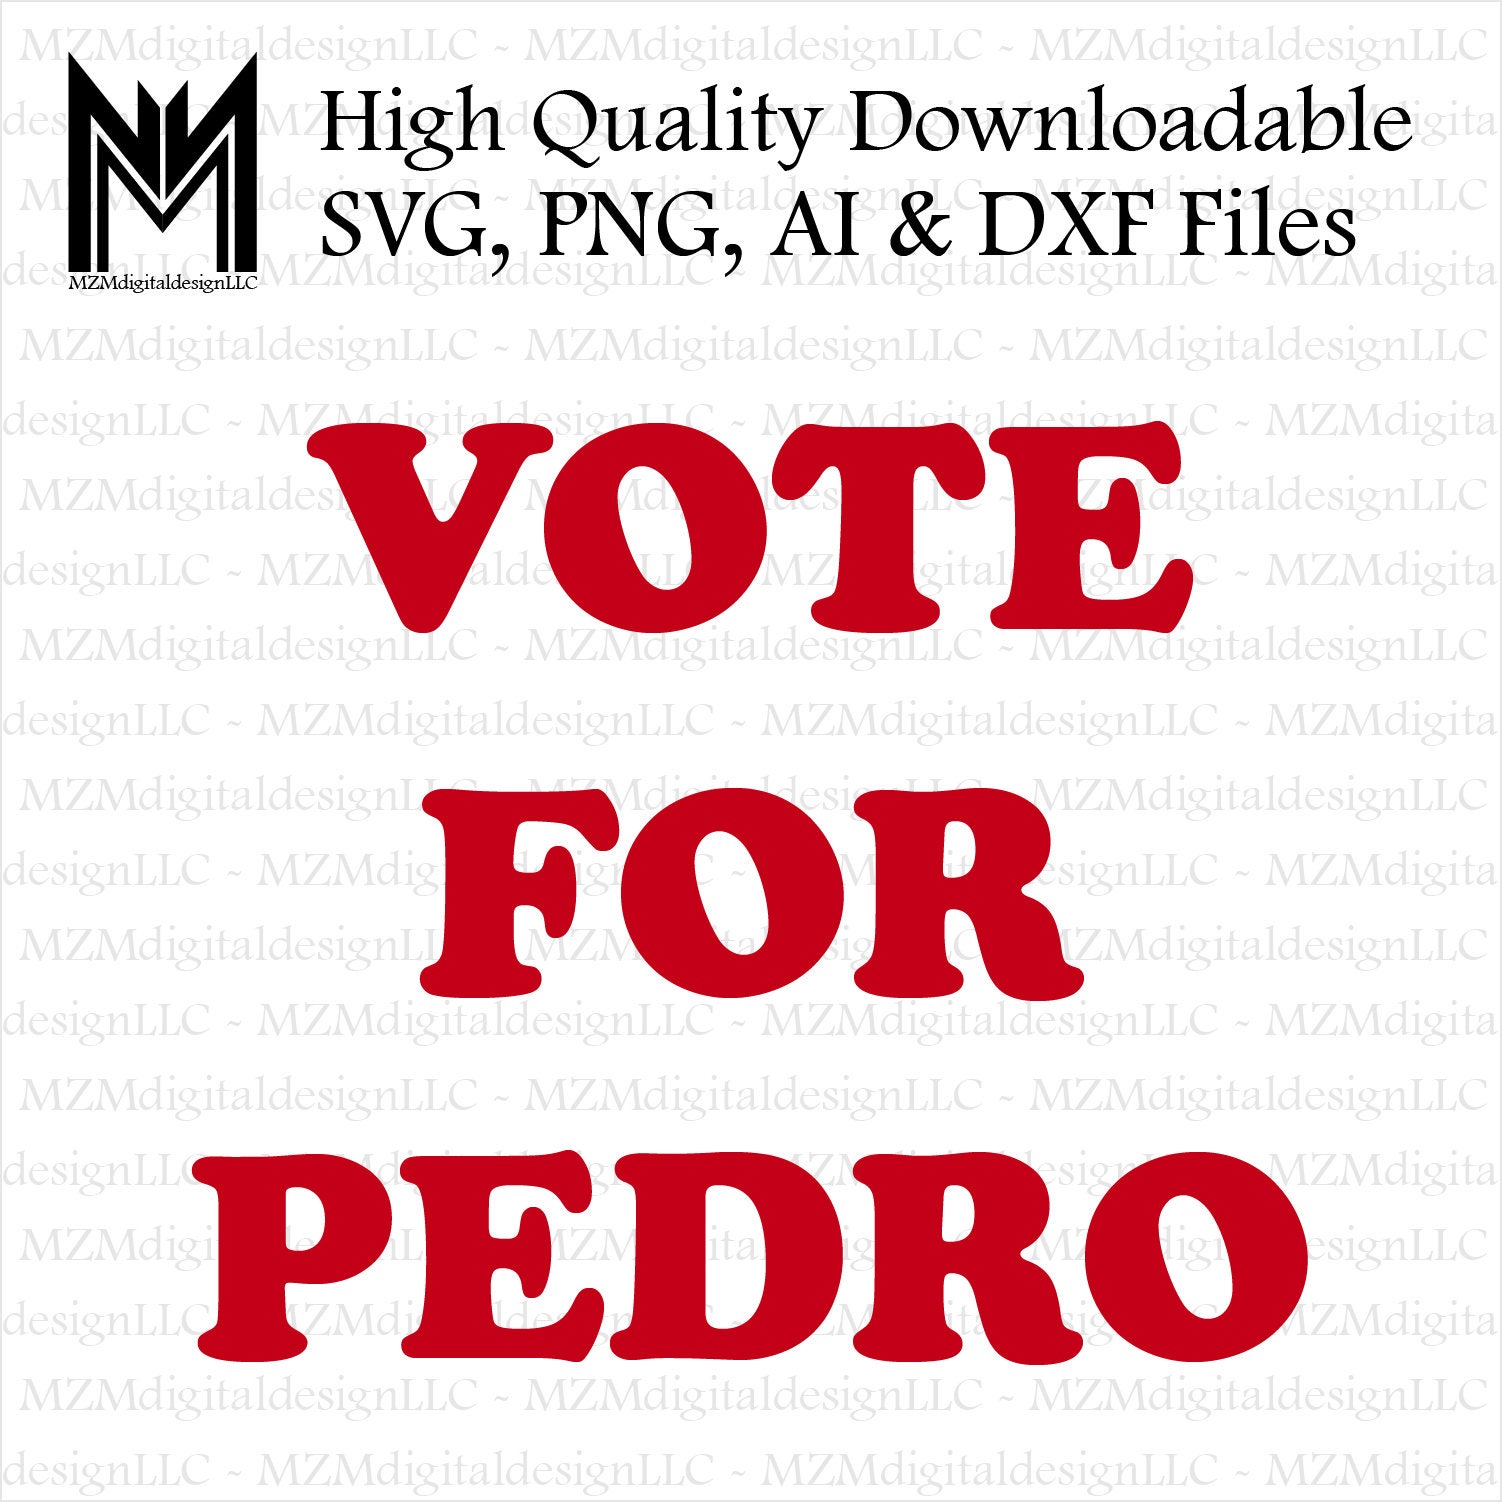 Napoleon Dynamite Vote for Pedro Svg Png Ai and Dxf Etsy